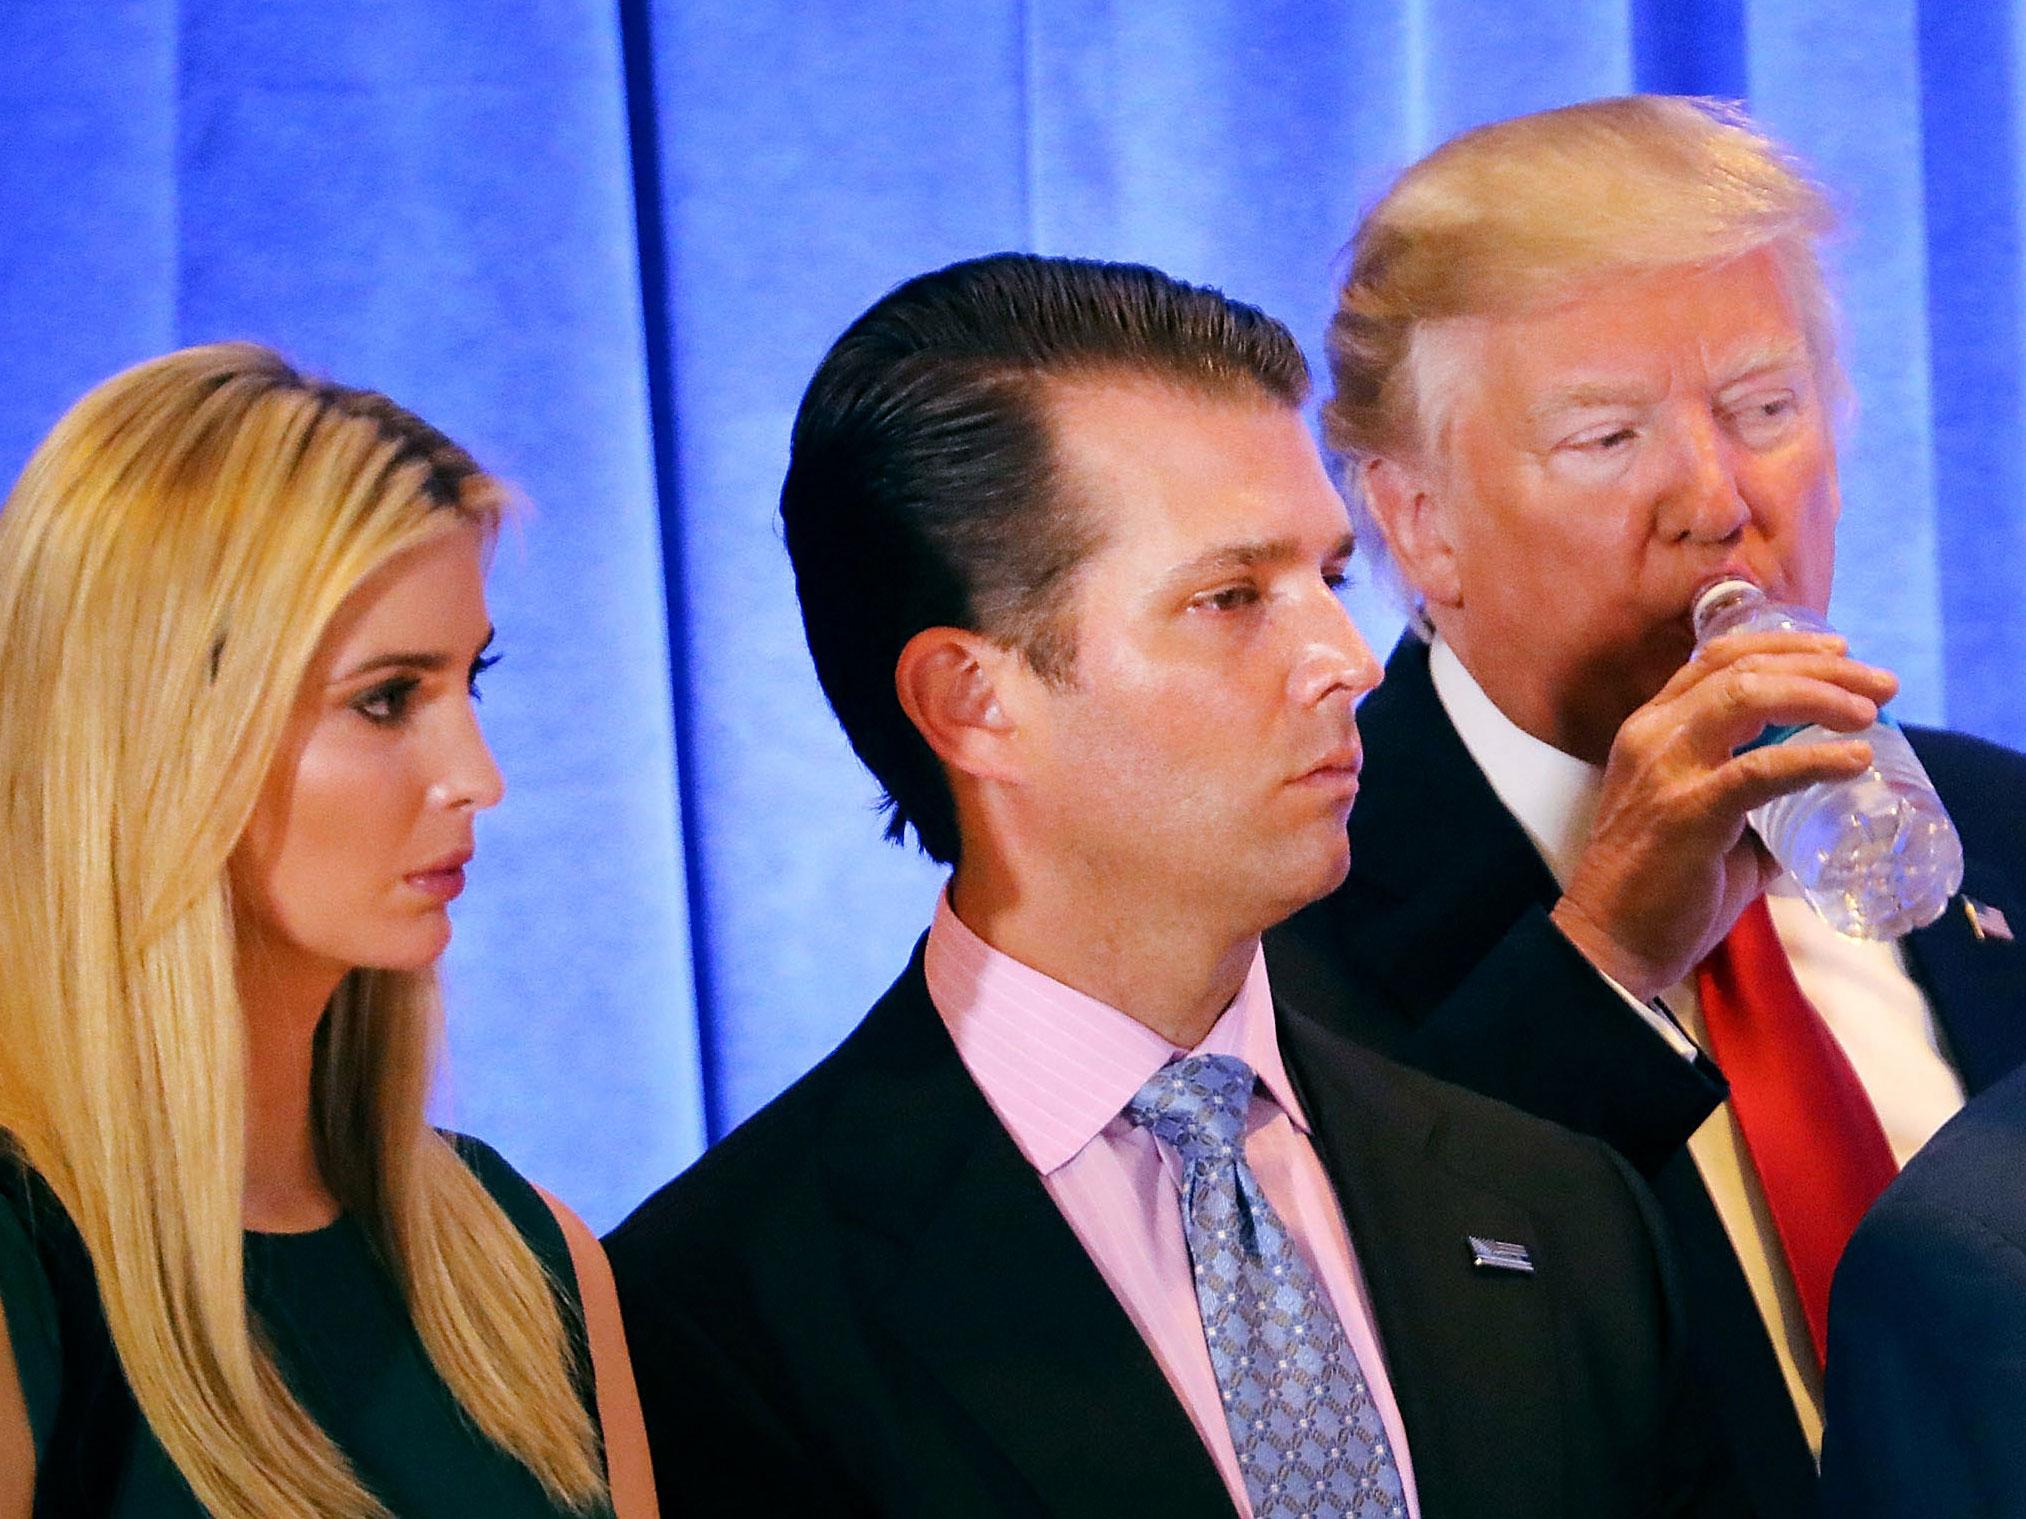 Ivanka and Don Jr with their father